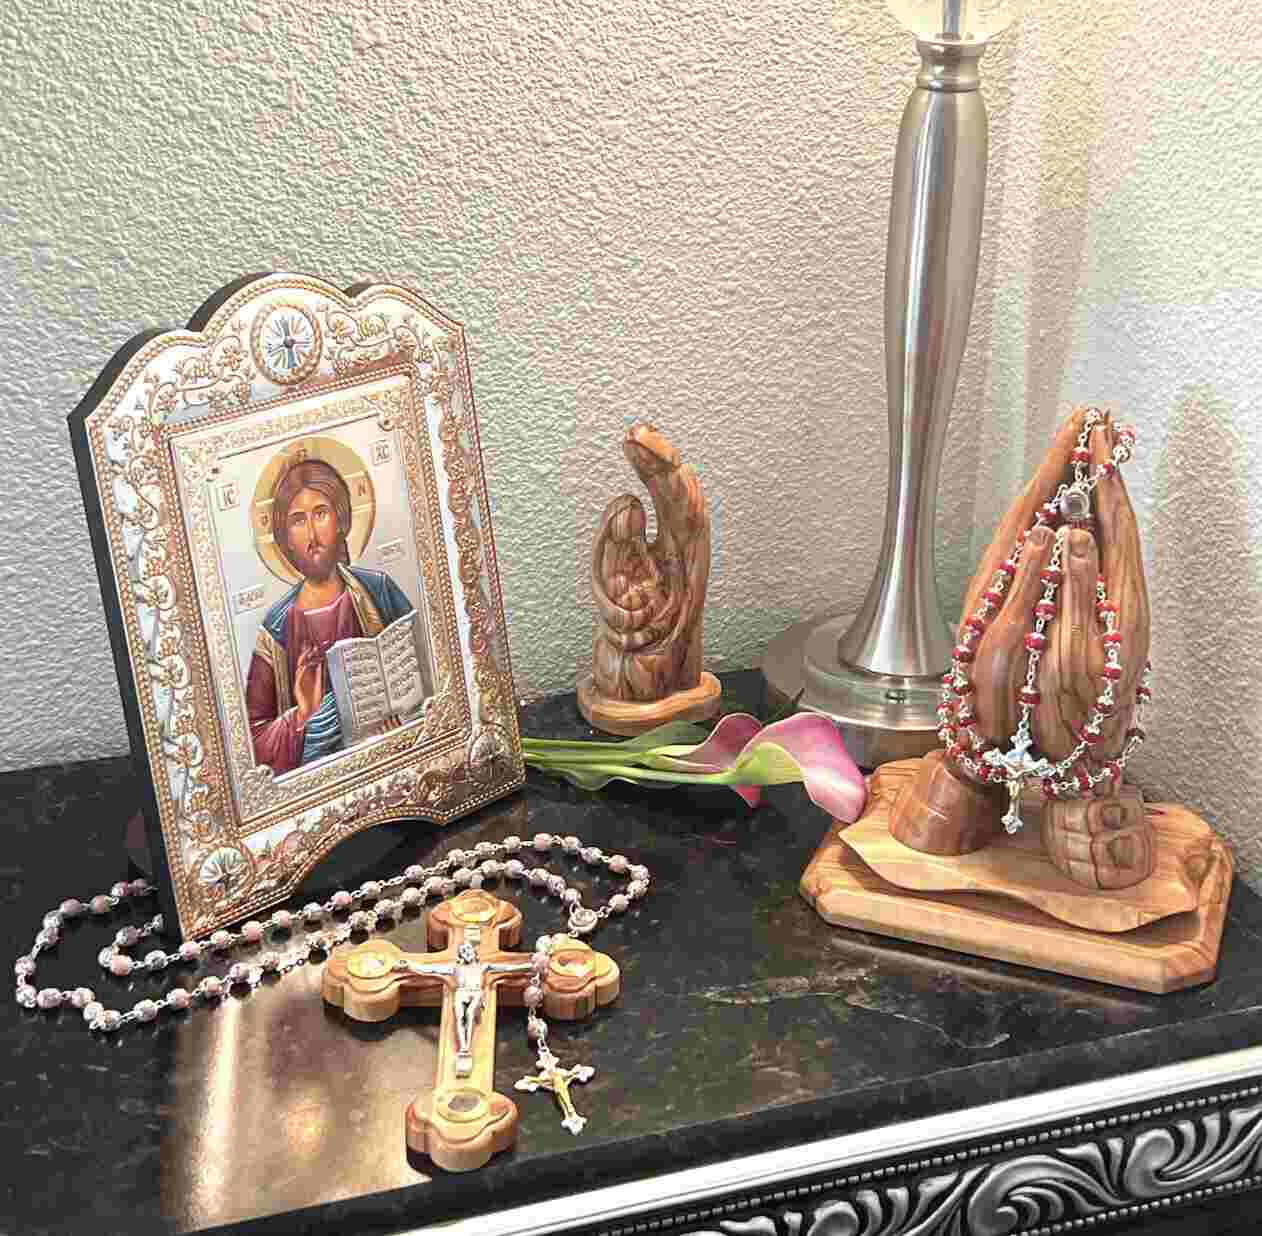 Jesus Christ Silver Plated Icon with Unique Silver Frame Standing or Wall Hanging Christian Art Decor